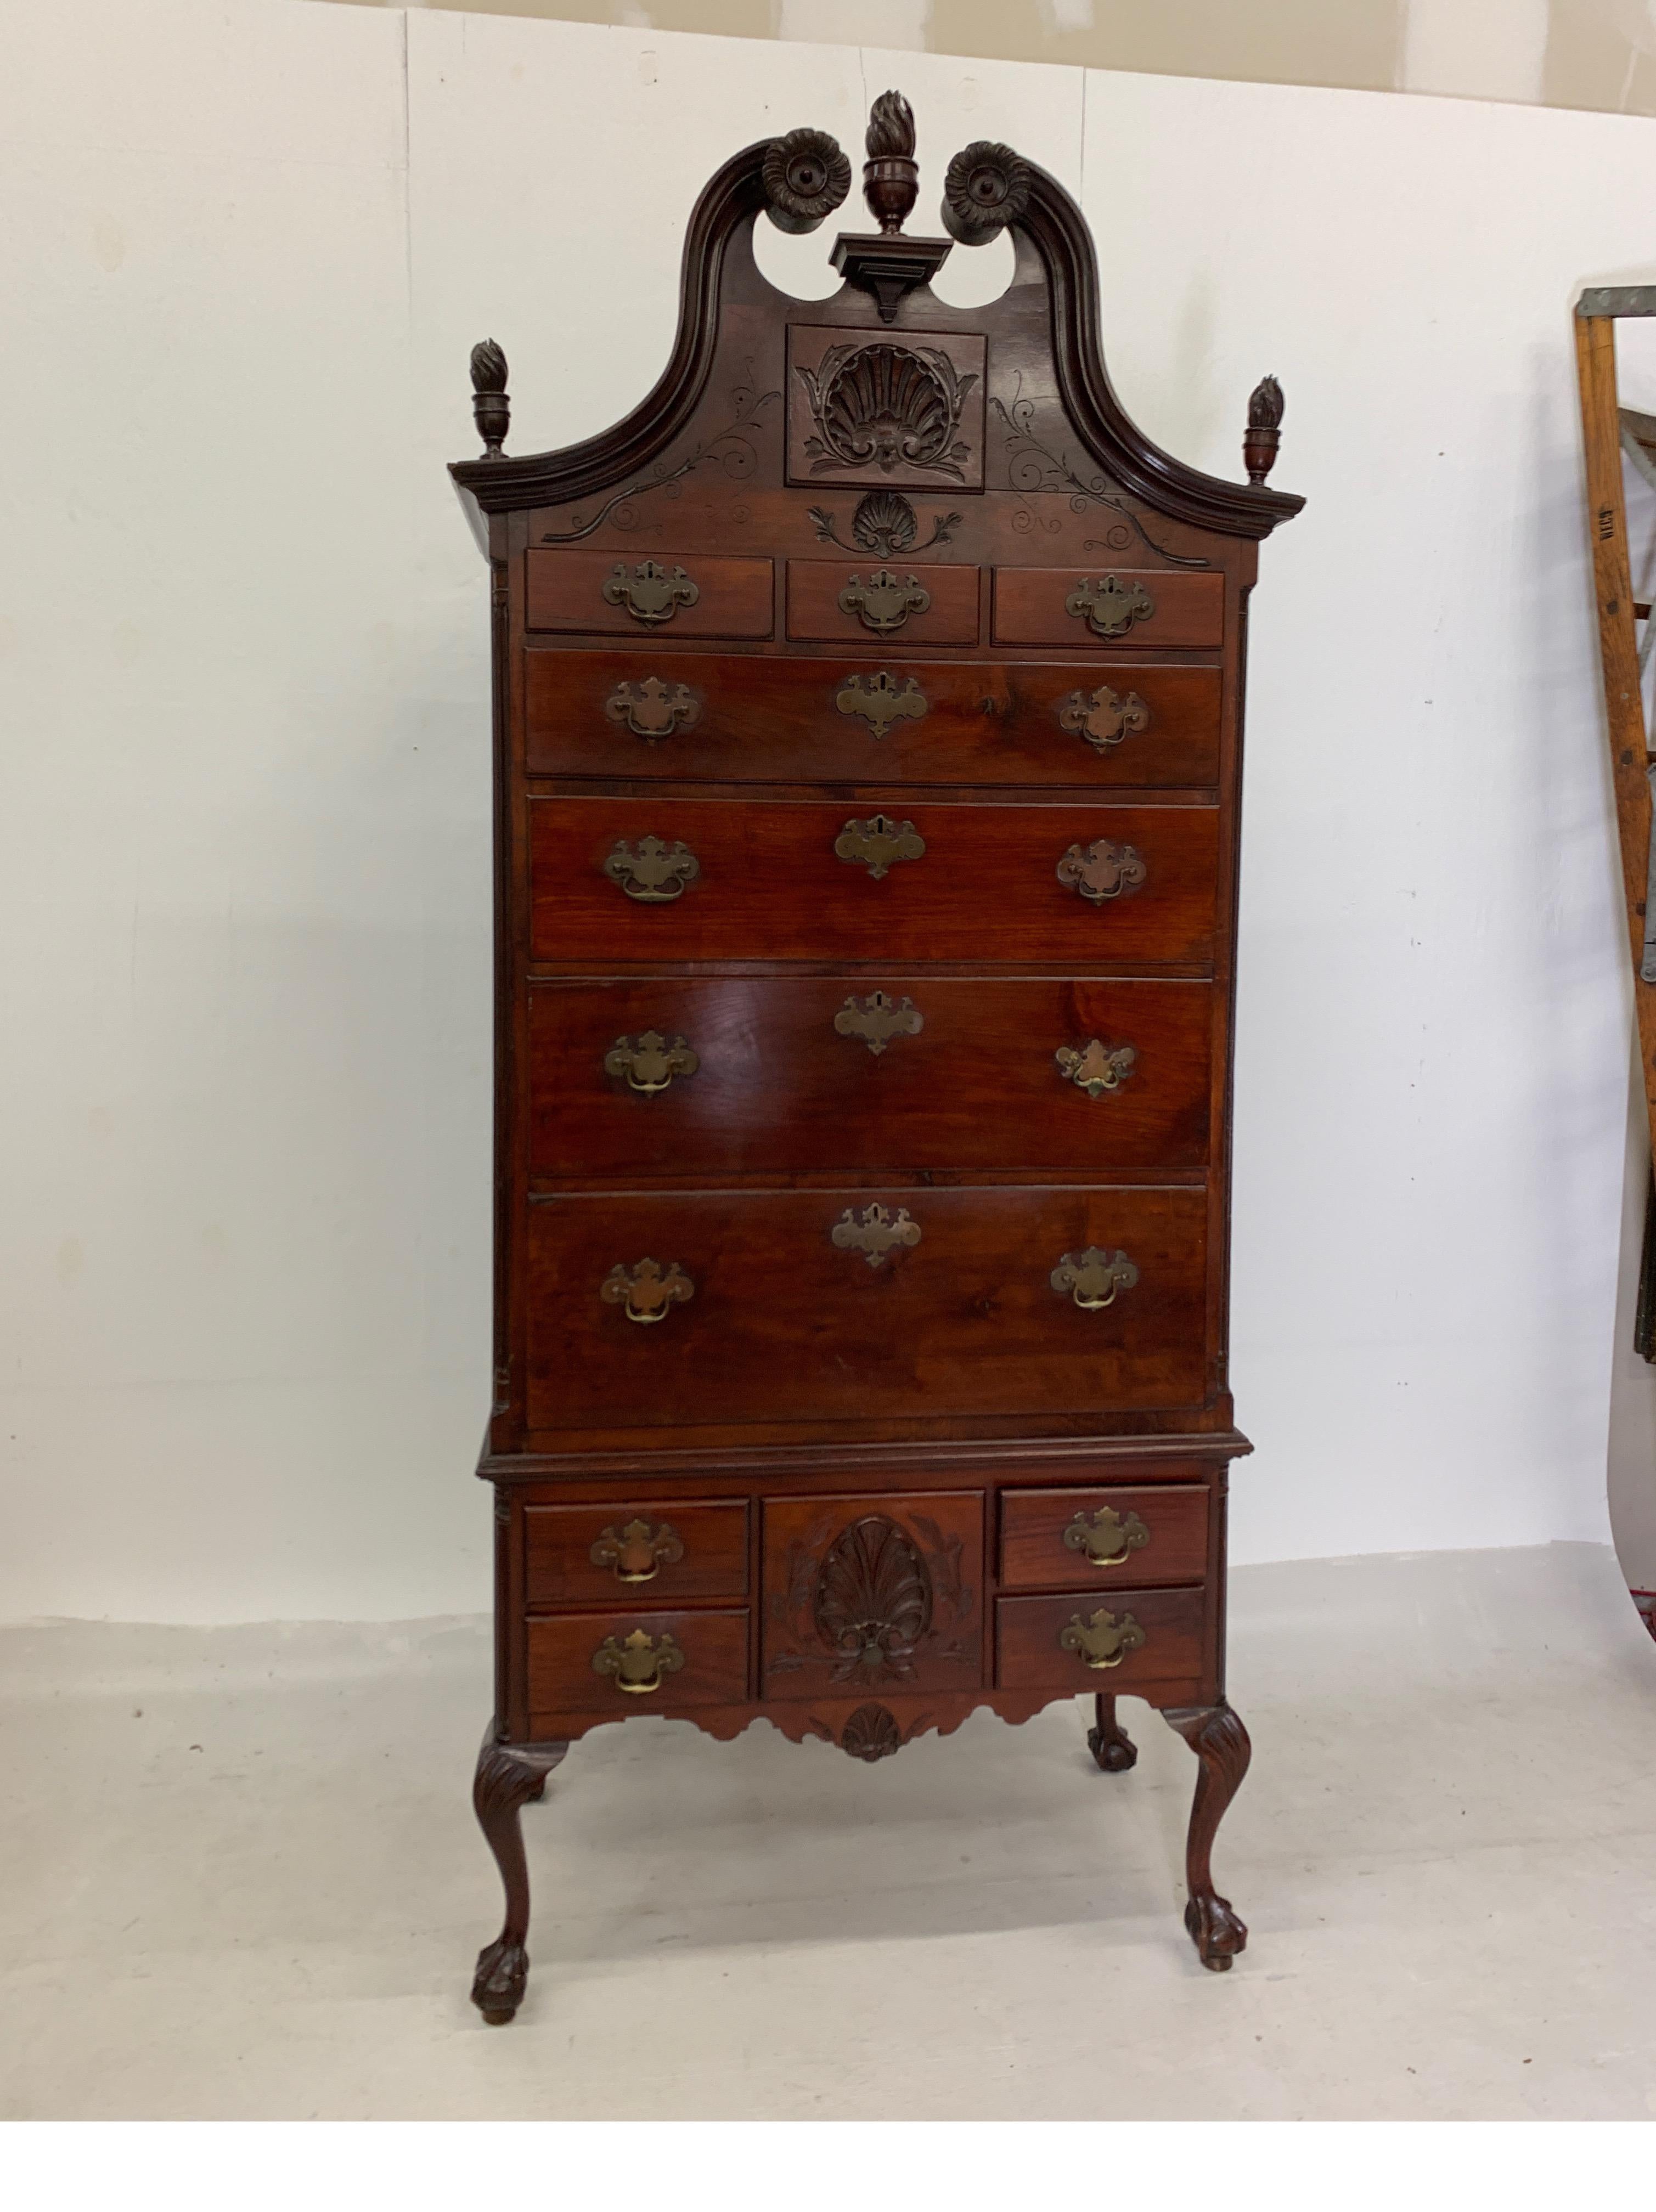 Monumental 1880s Highboy in mahogany with flame finials and cabriole legs, includes step stool. Top has three smaller drawers over four large drawers, base has five small drawers. 102